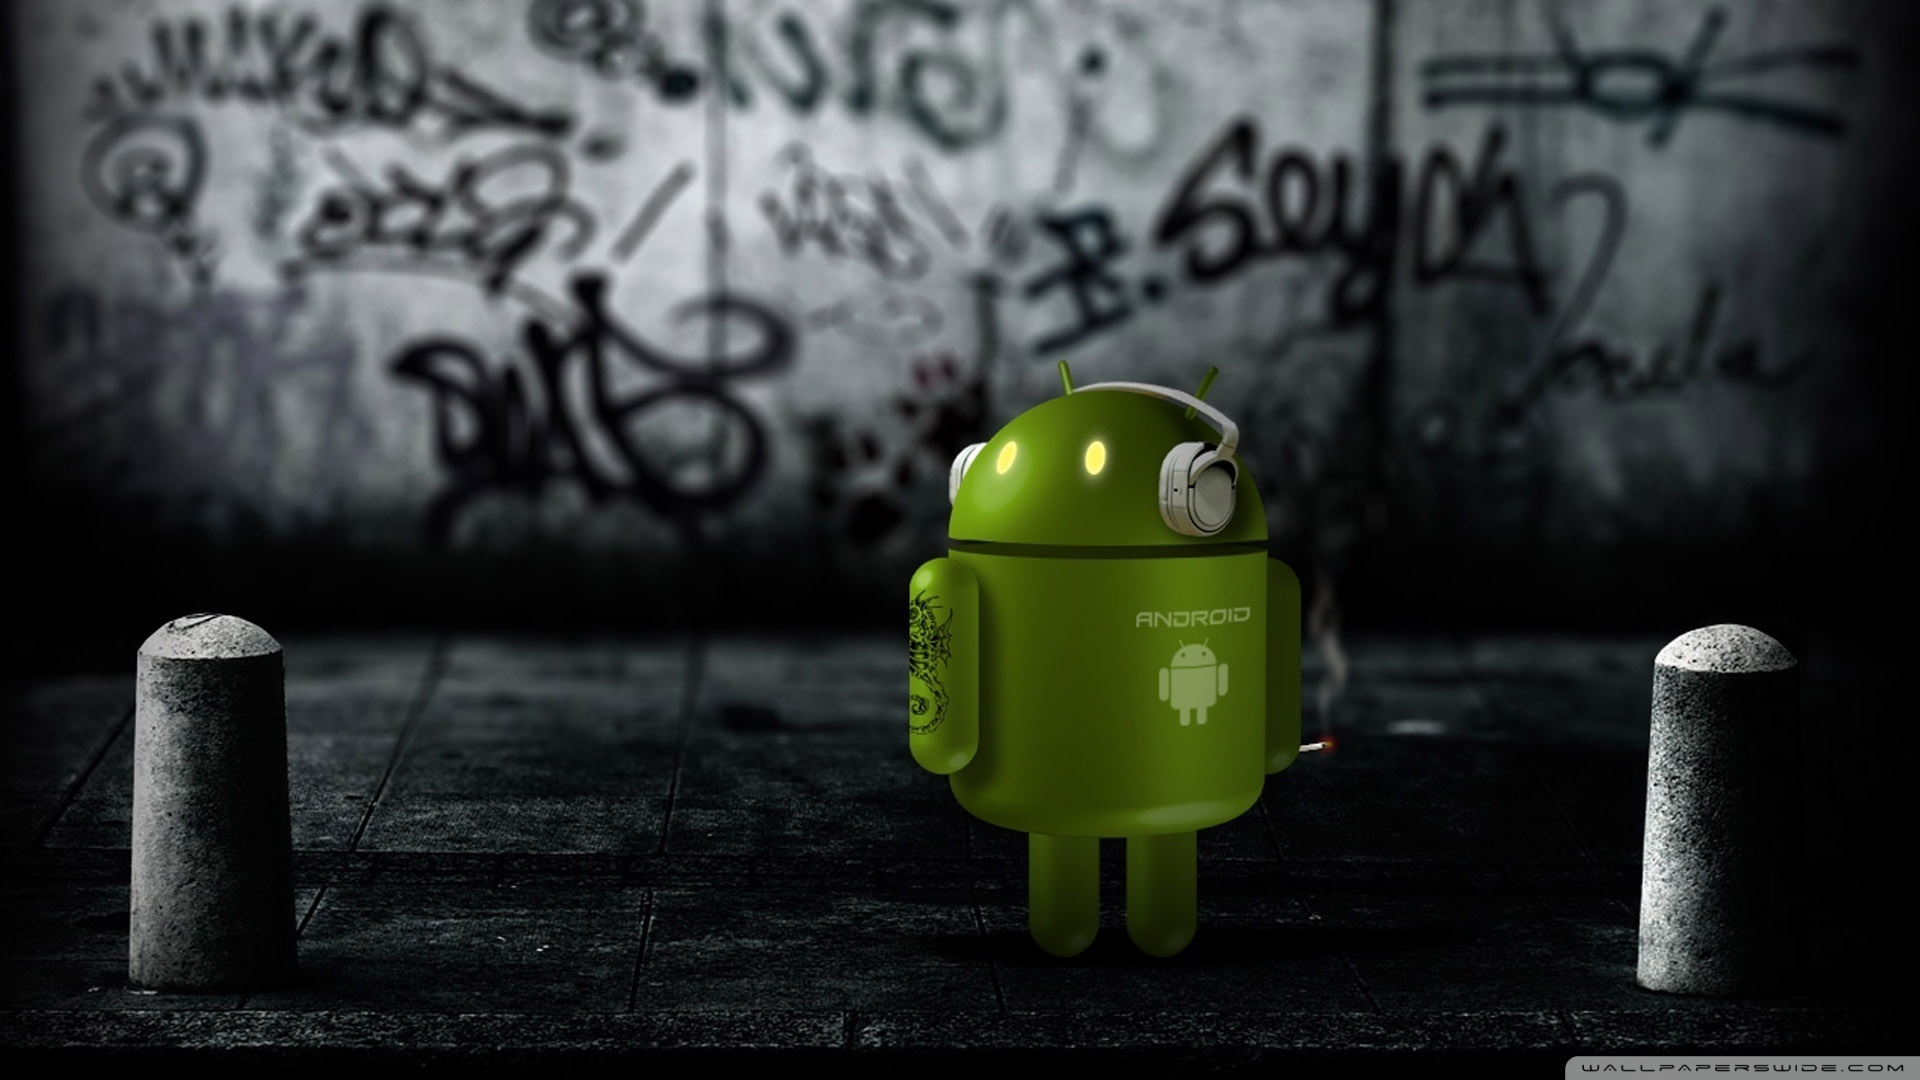 Android Robot Listening To Music Wallpaper 1920x1080 Android Robot 1920x1080